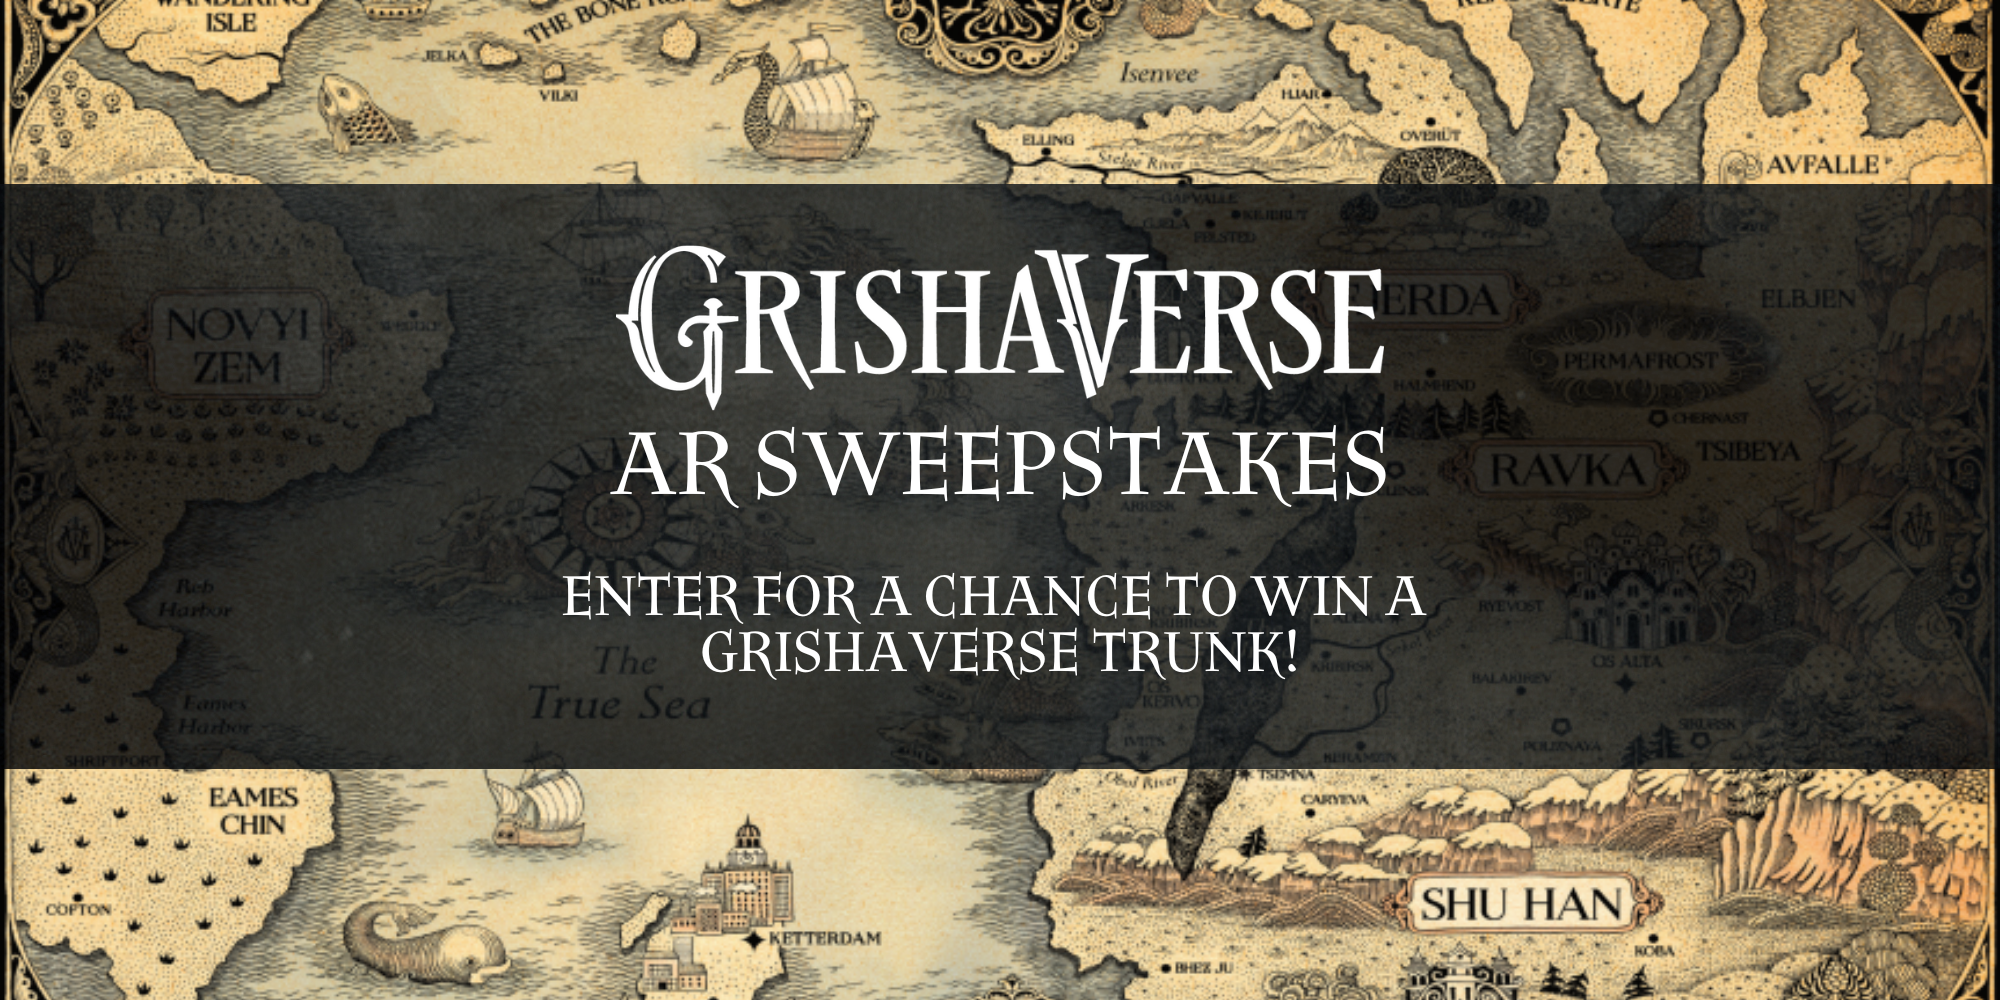 Watch the Grishaverse Map Come to Life!